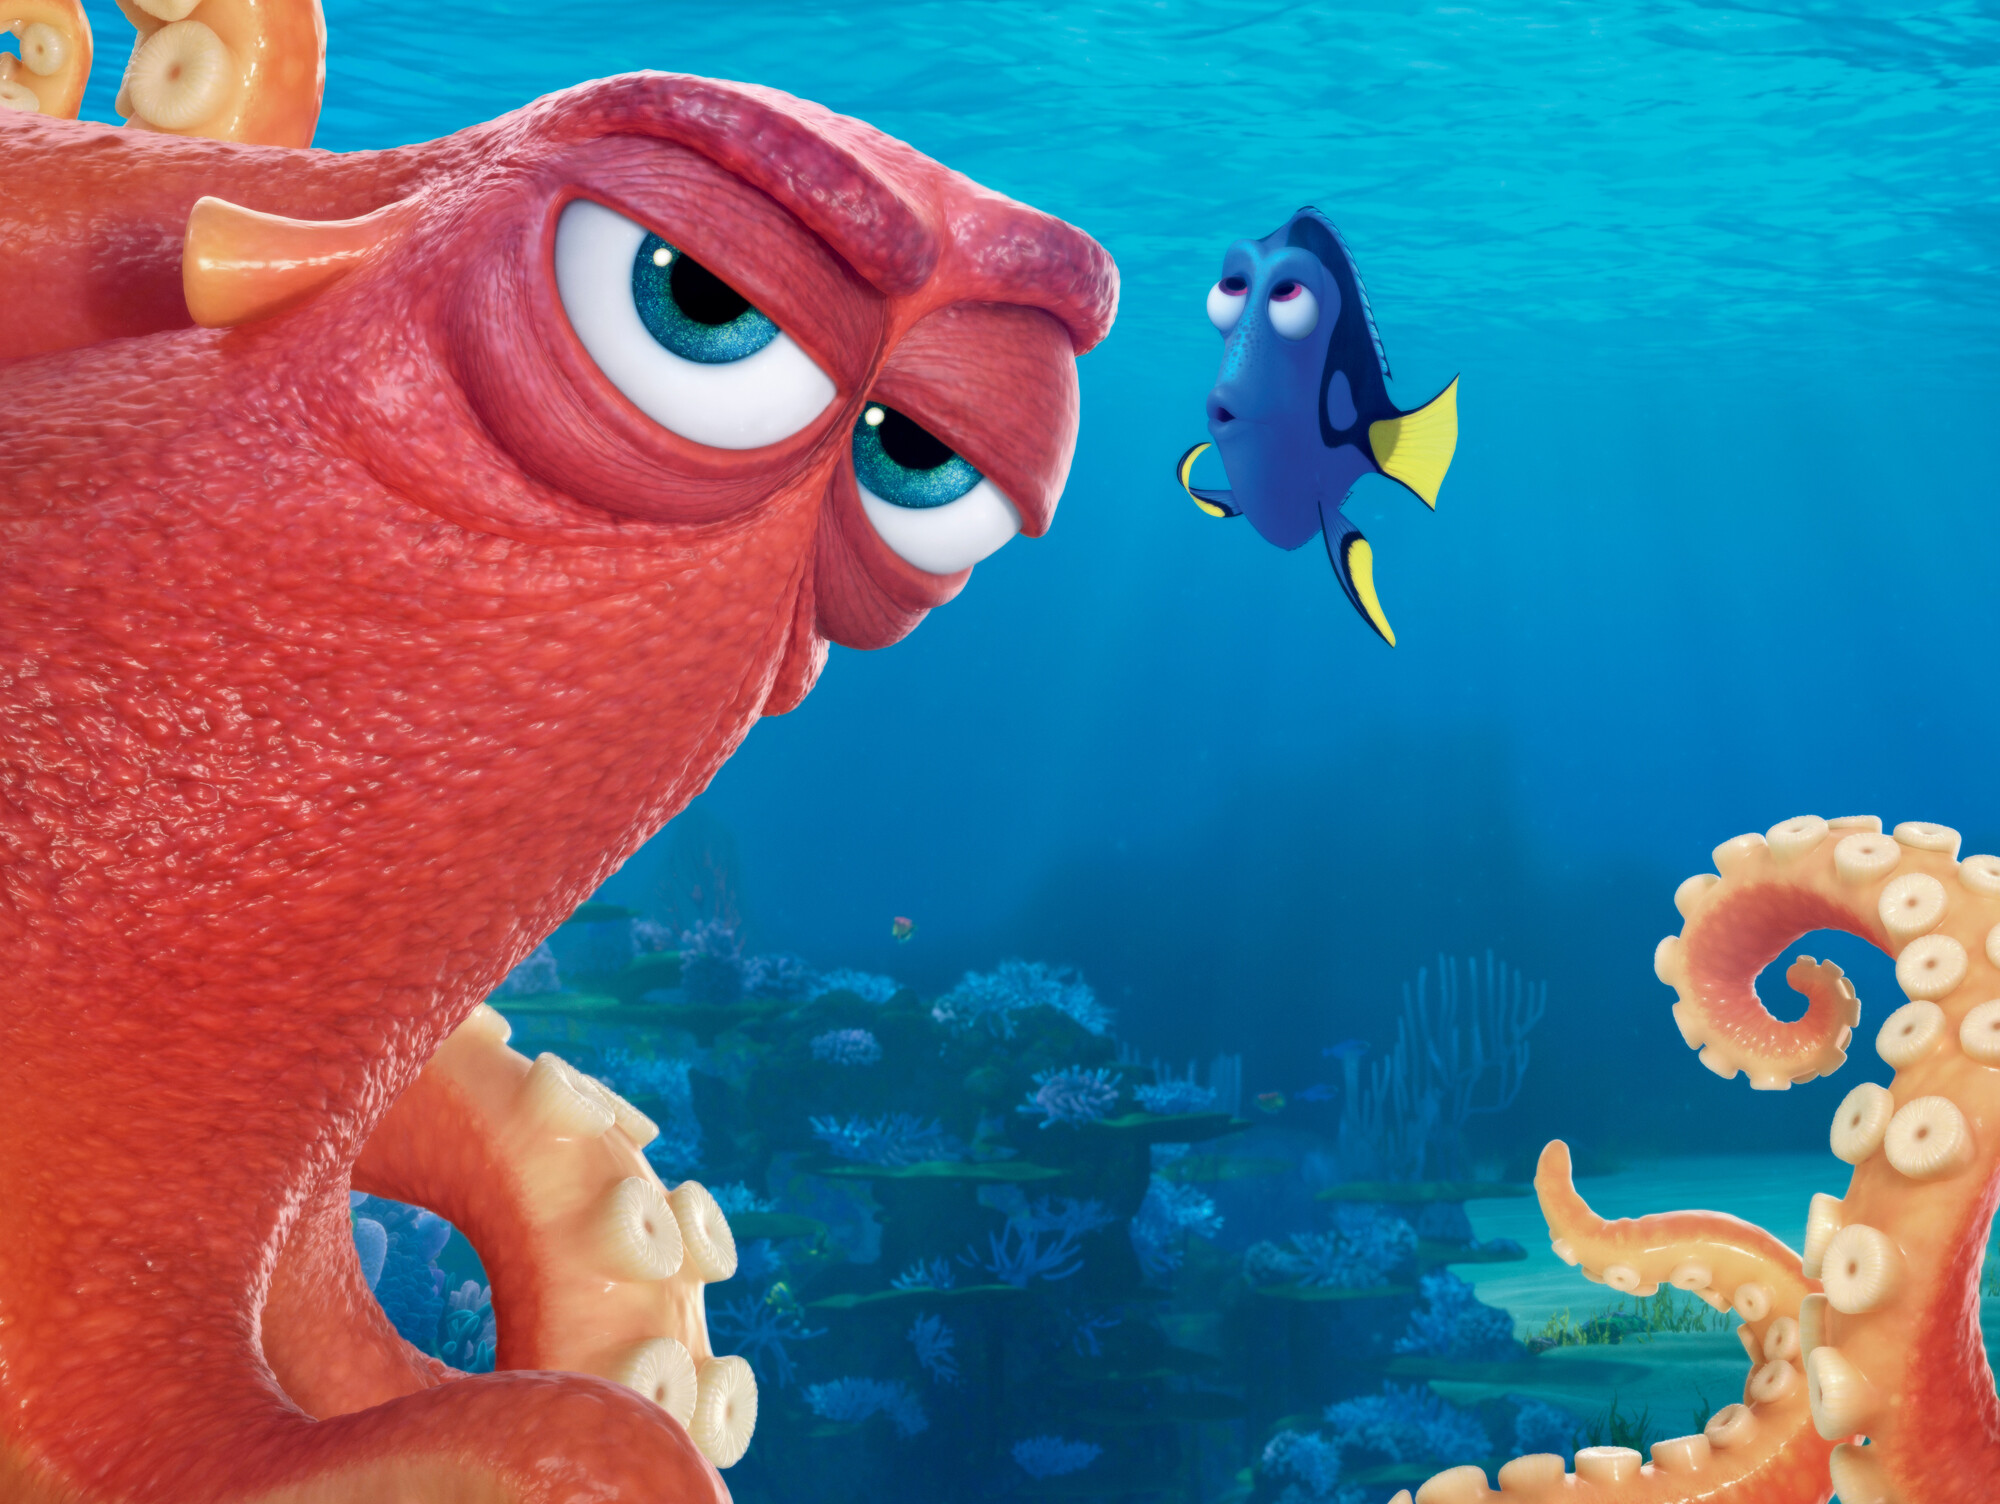 Finding Dory: Disney Pixar's sequel to the 2003 Academy Award-winning family animated hit Finding Nemo, with Andrew Stanton returning to the director's chair. 2000x1510 HD Wallpaper.